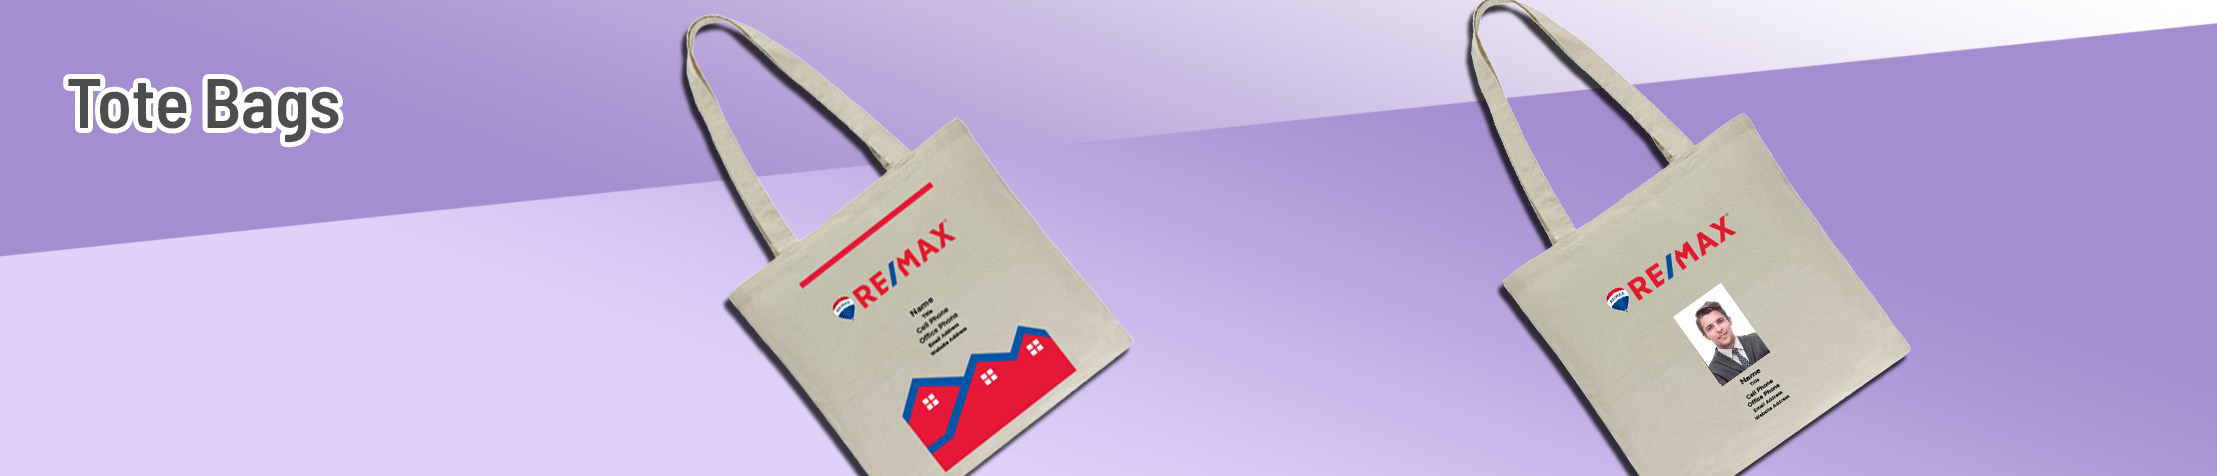 RE/MAX Real Estate Tote Bags - RE/MAX  personalized realtor promotional products | Sparkprint.com